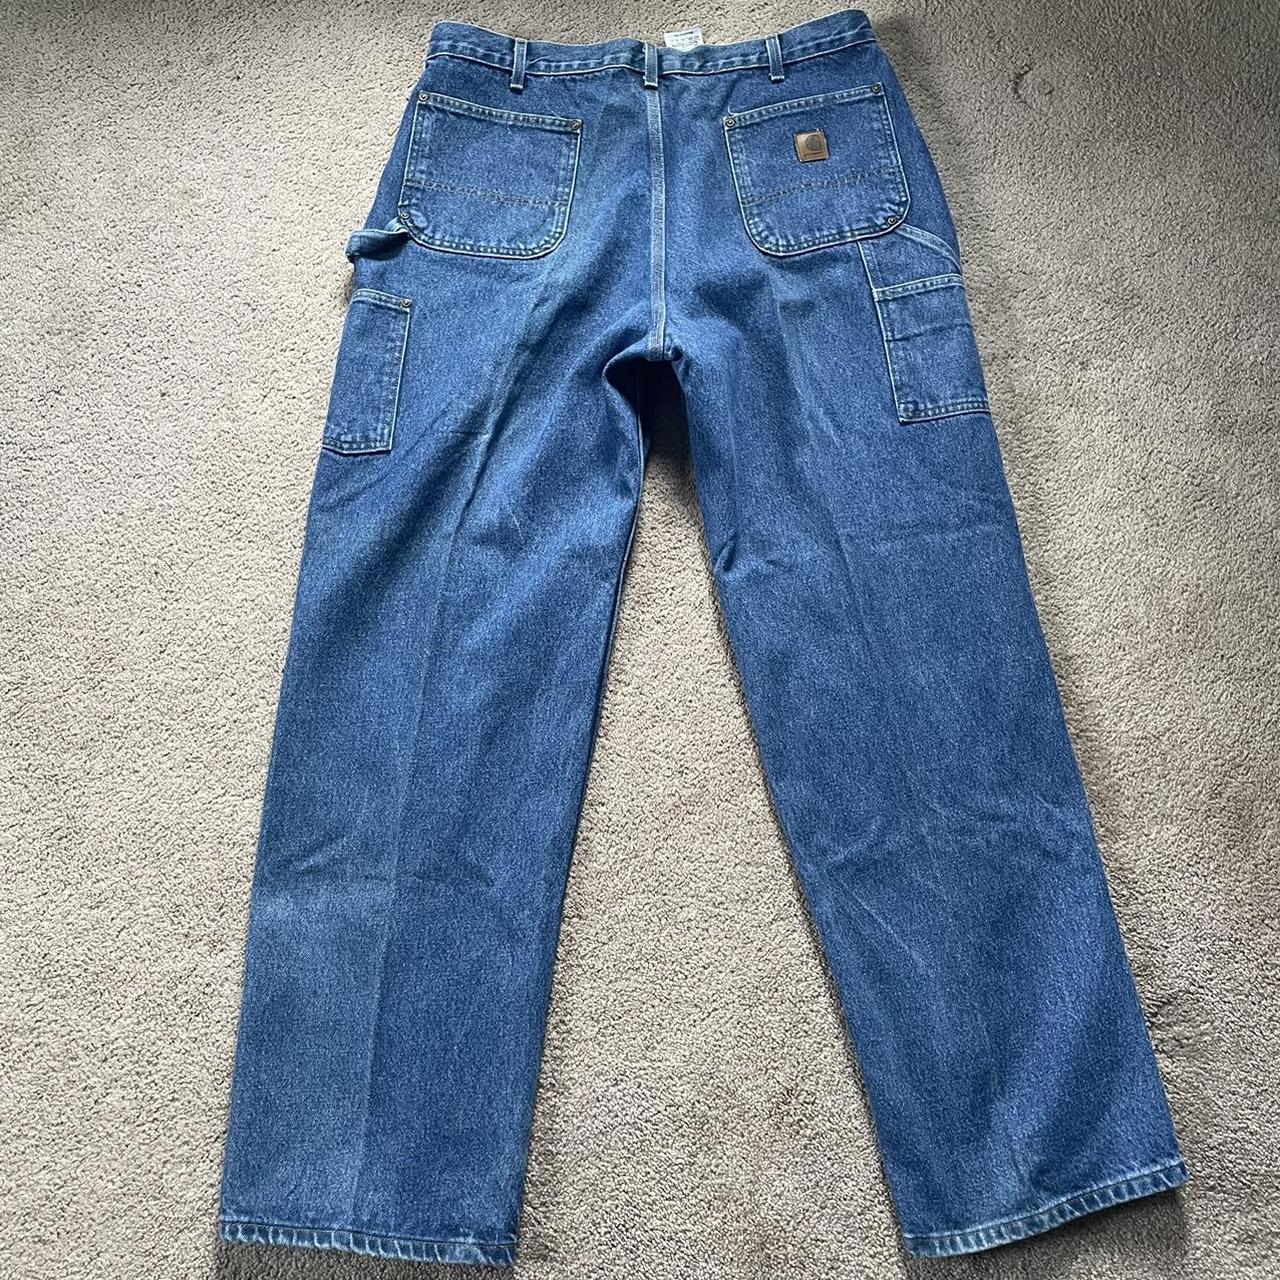 Carhartt double knee jeans Size 40 x 34 Condition... - Depop